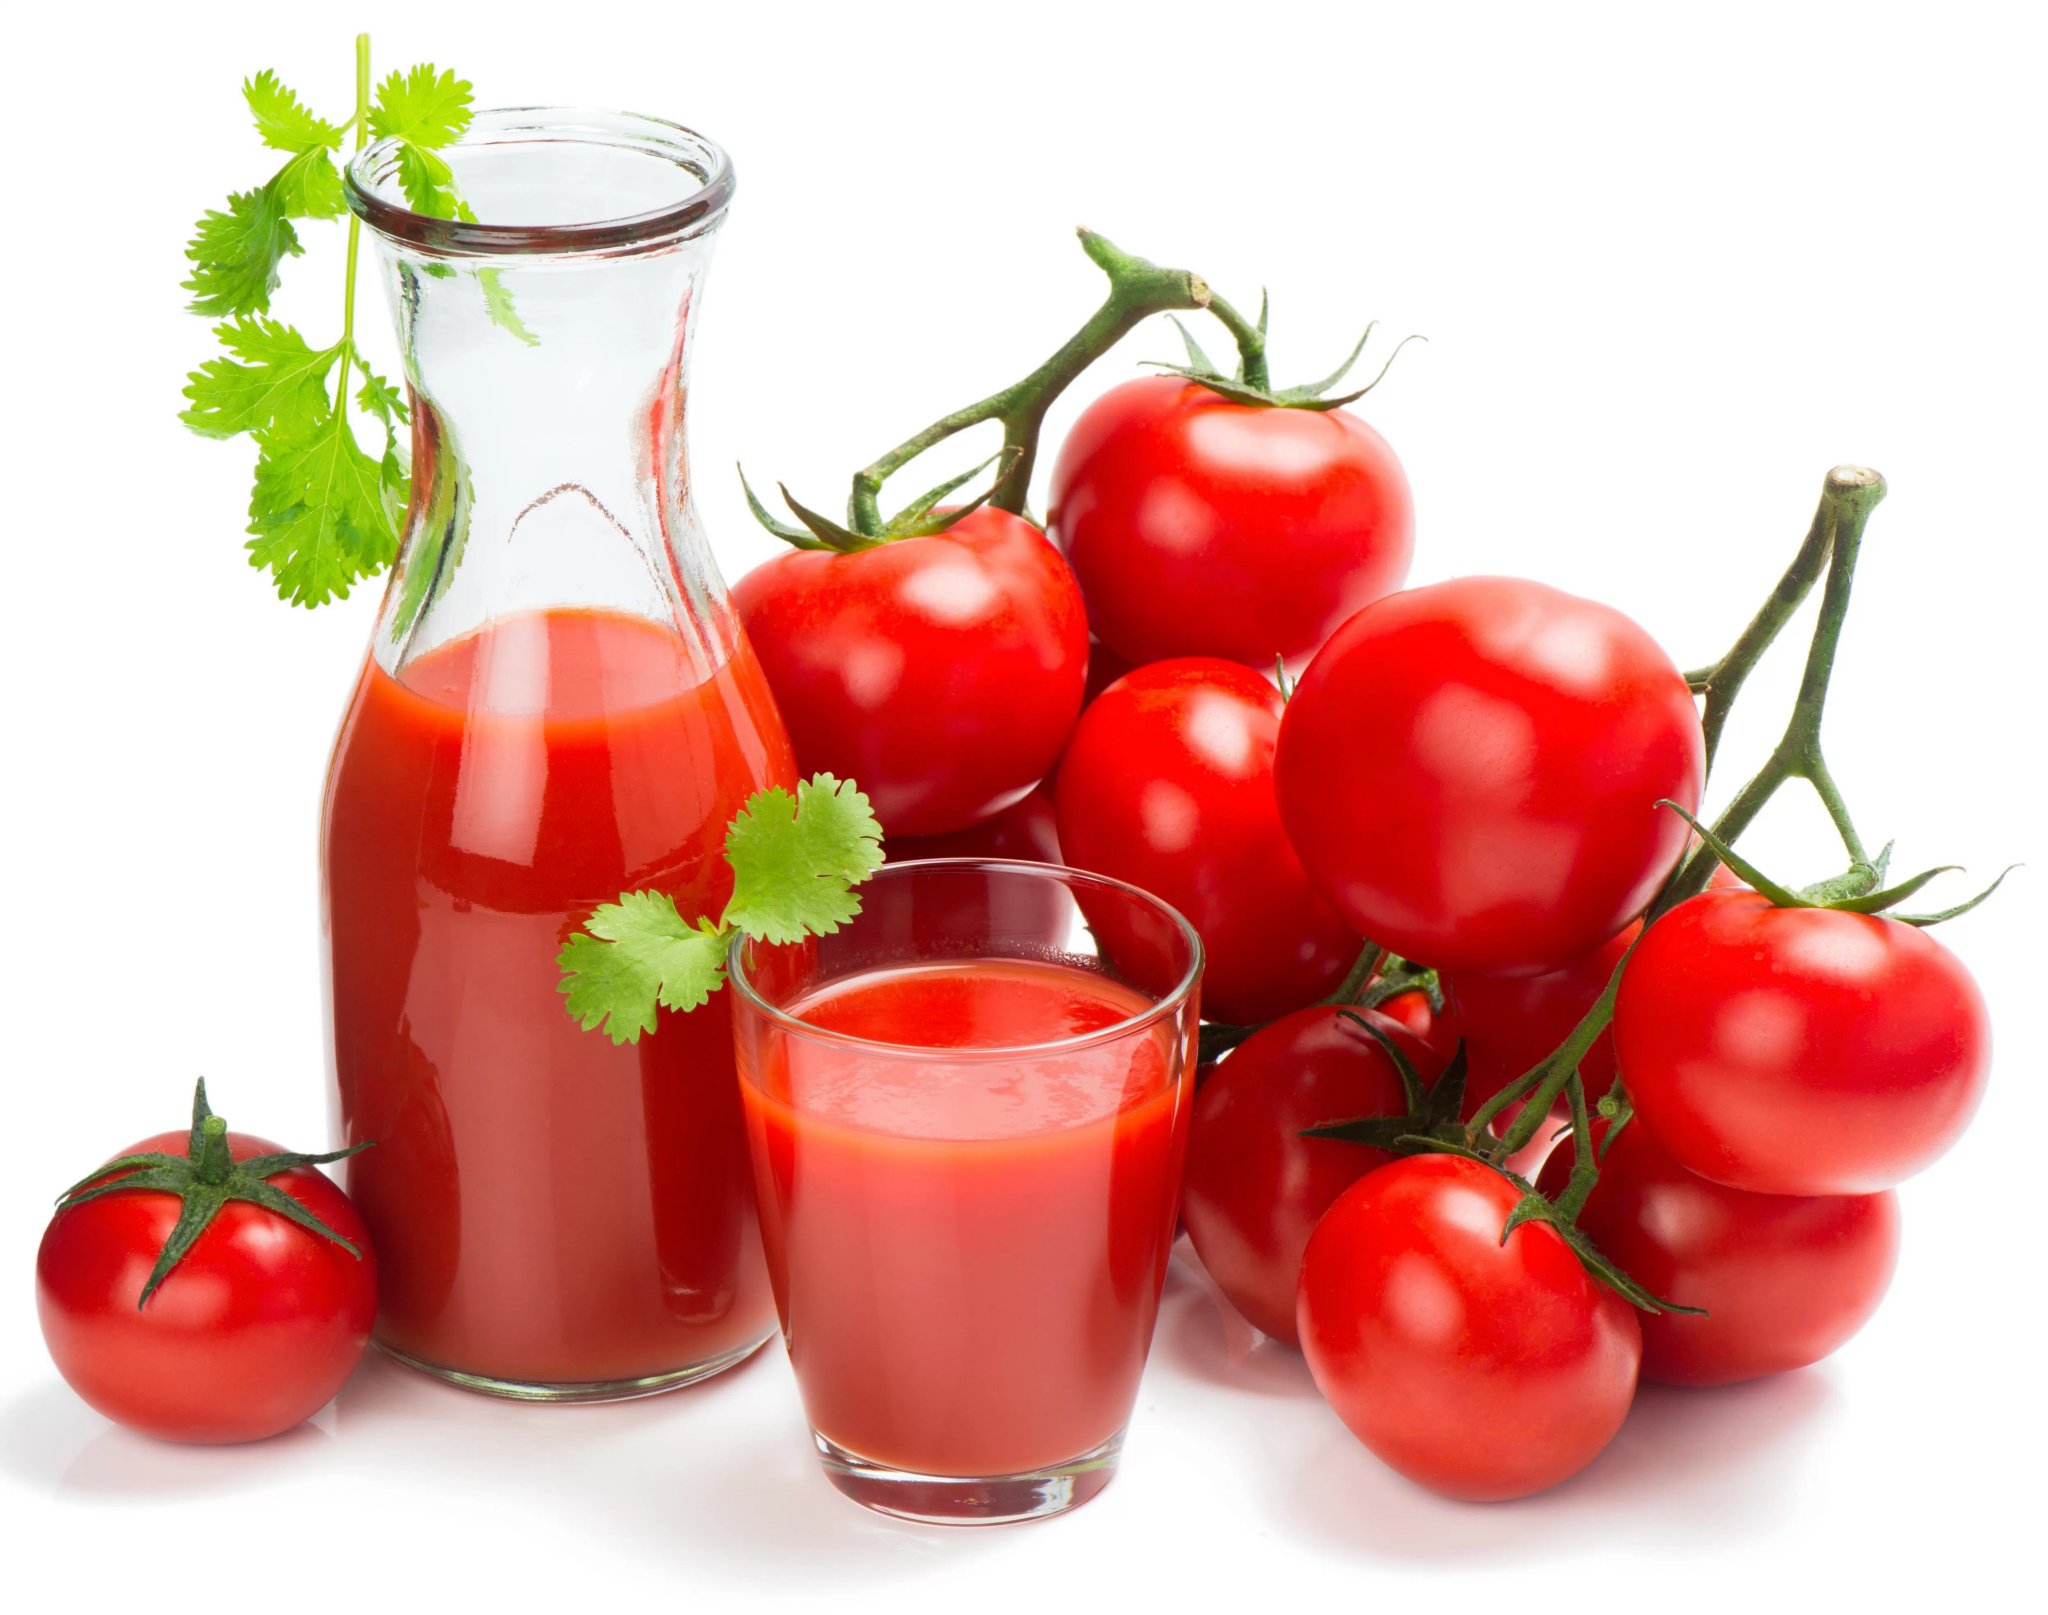 Four(4) Amazing Health Benefits Of Eating Tomatoes